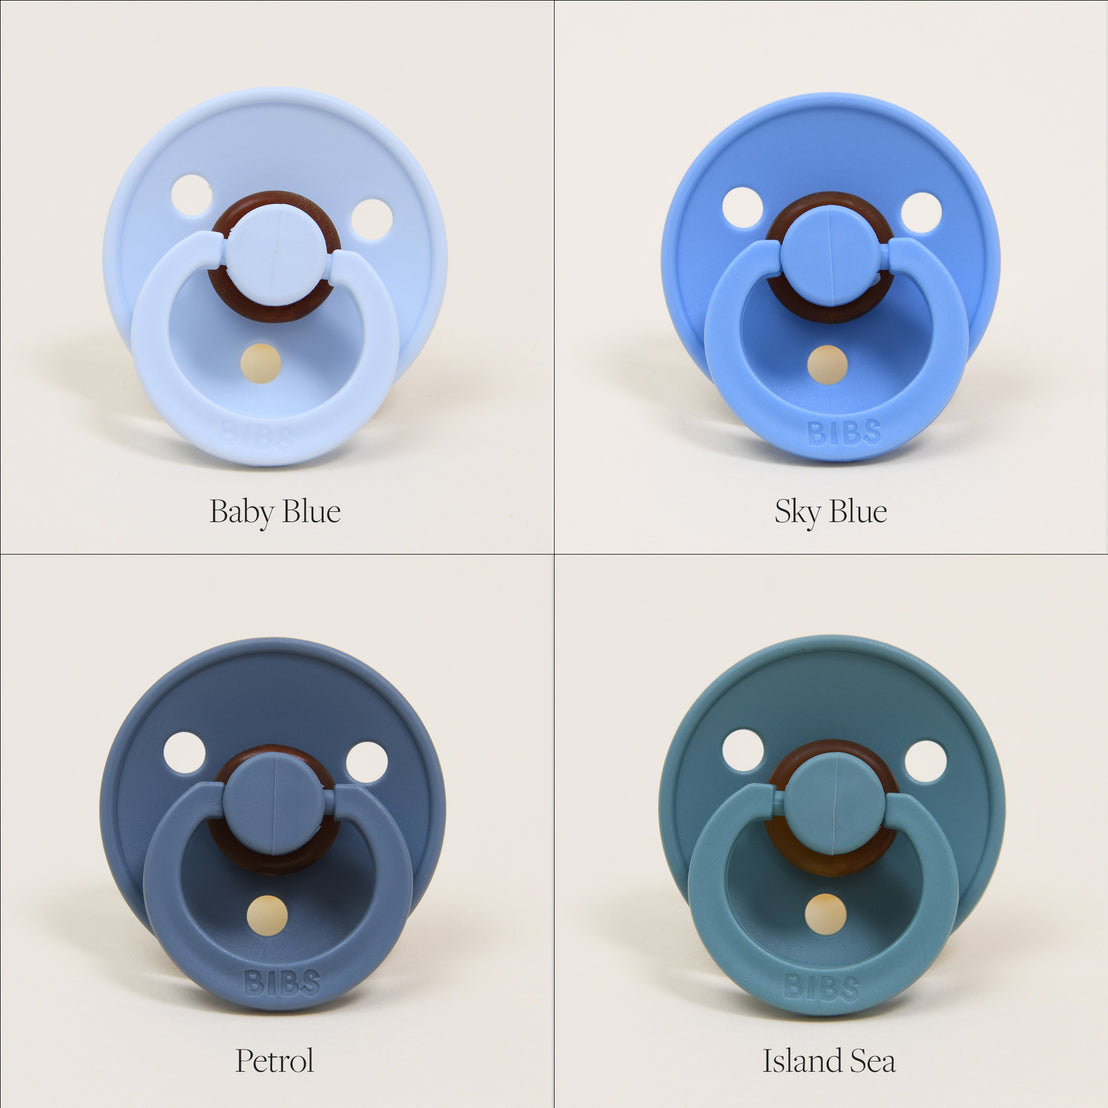 Four Bibs Pacifiers in shades of blue labeled baby blue, sky blue, petrol, and island sea, each against a matching pastel blue background.